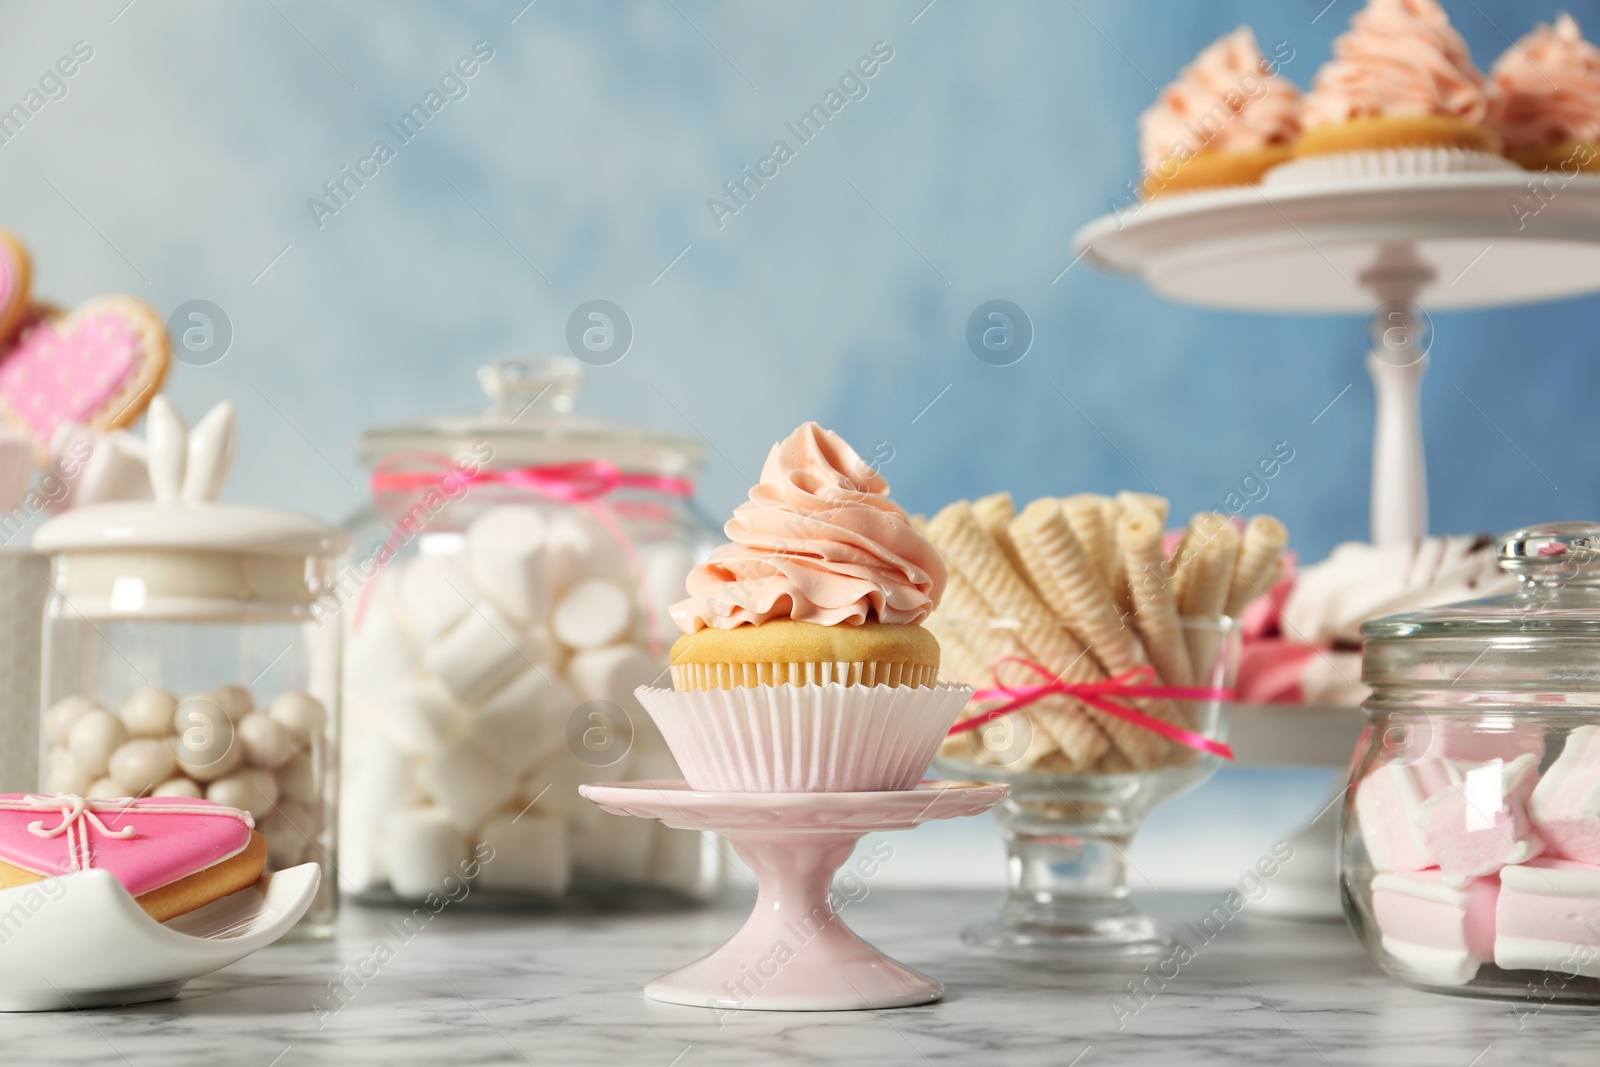 Photo of Stand with cupcake and other sweets on white marble table. Candy bar